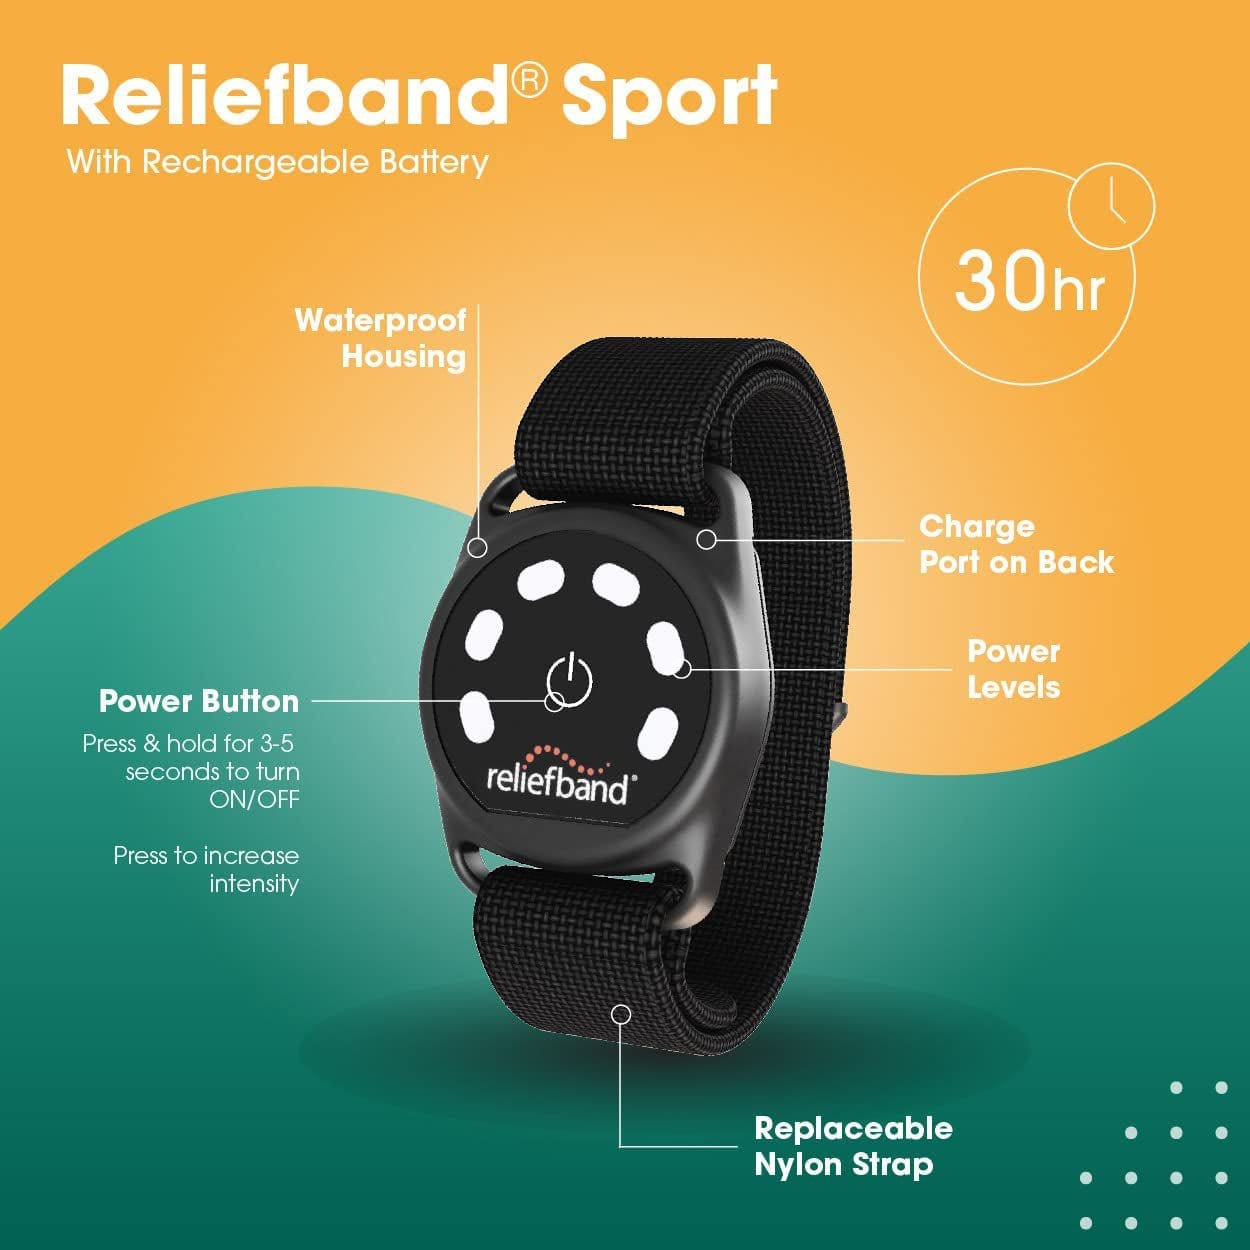 Reliefband Sport for Motion Sickness